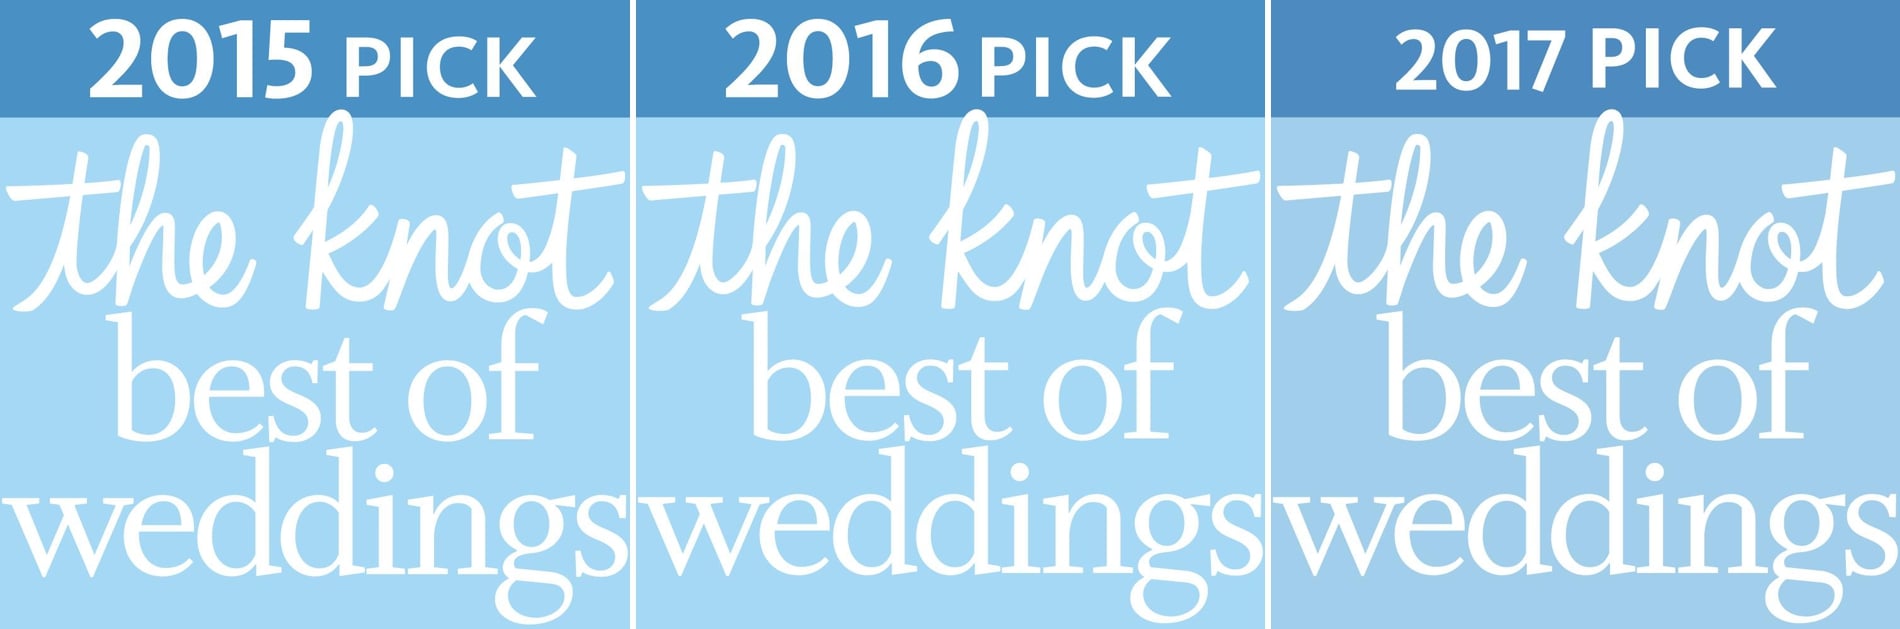 The Knot Best Weddings